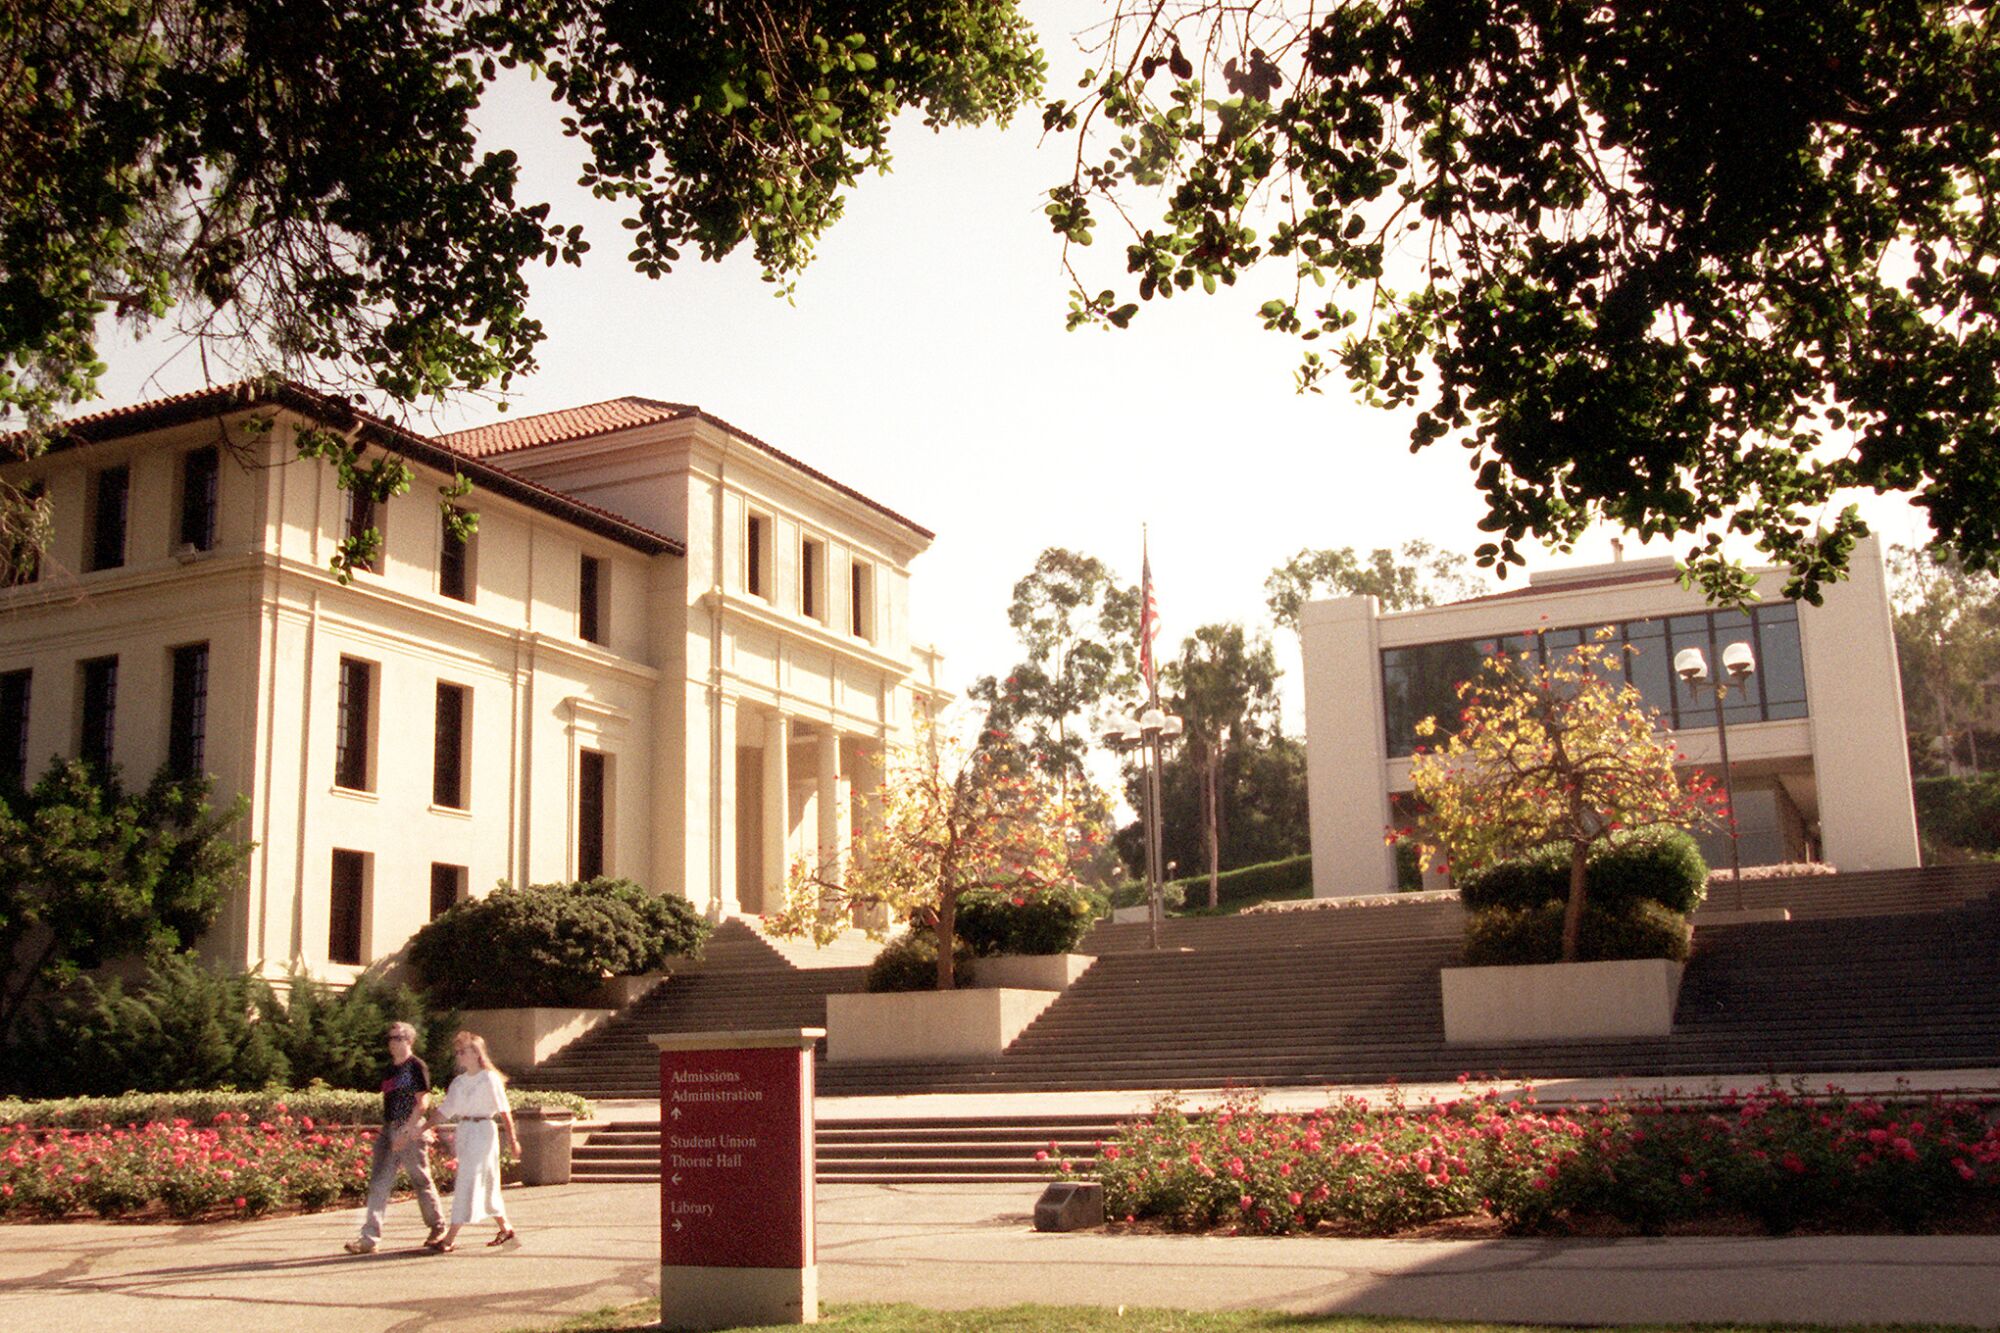 Johnson Hall, left, and the Coons Administration Center on the campus of Occidental College.